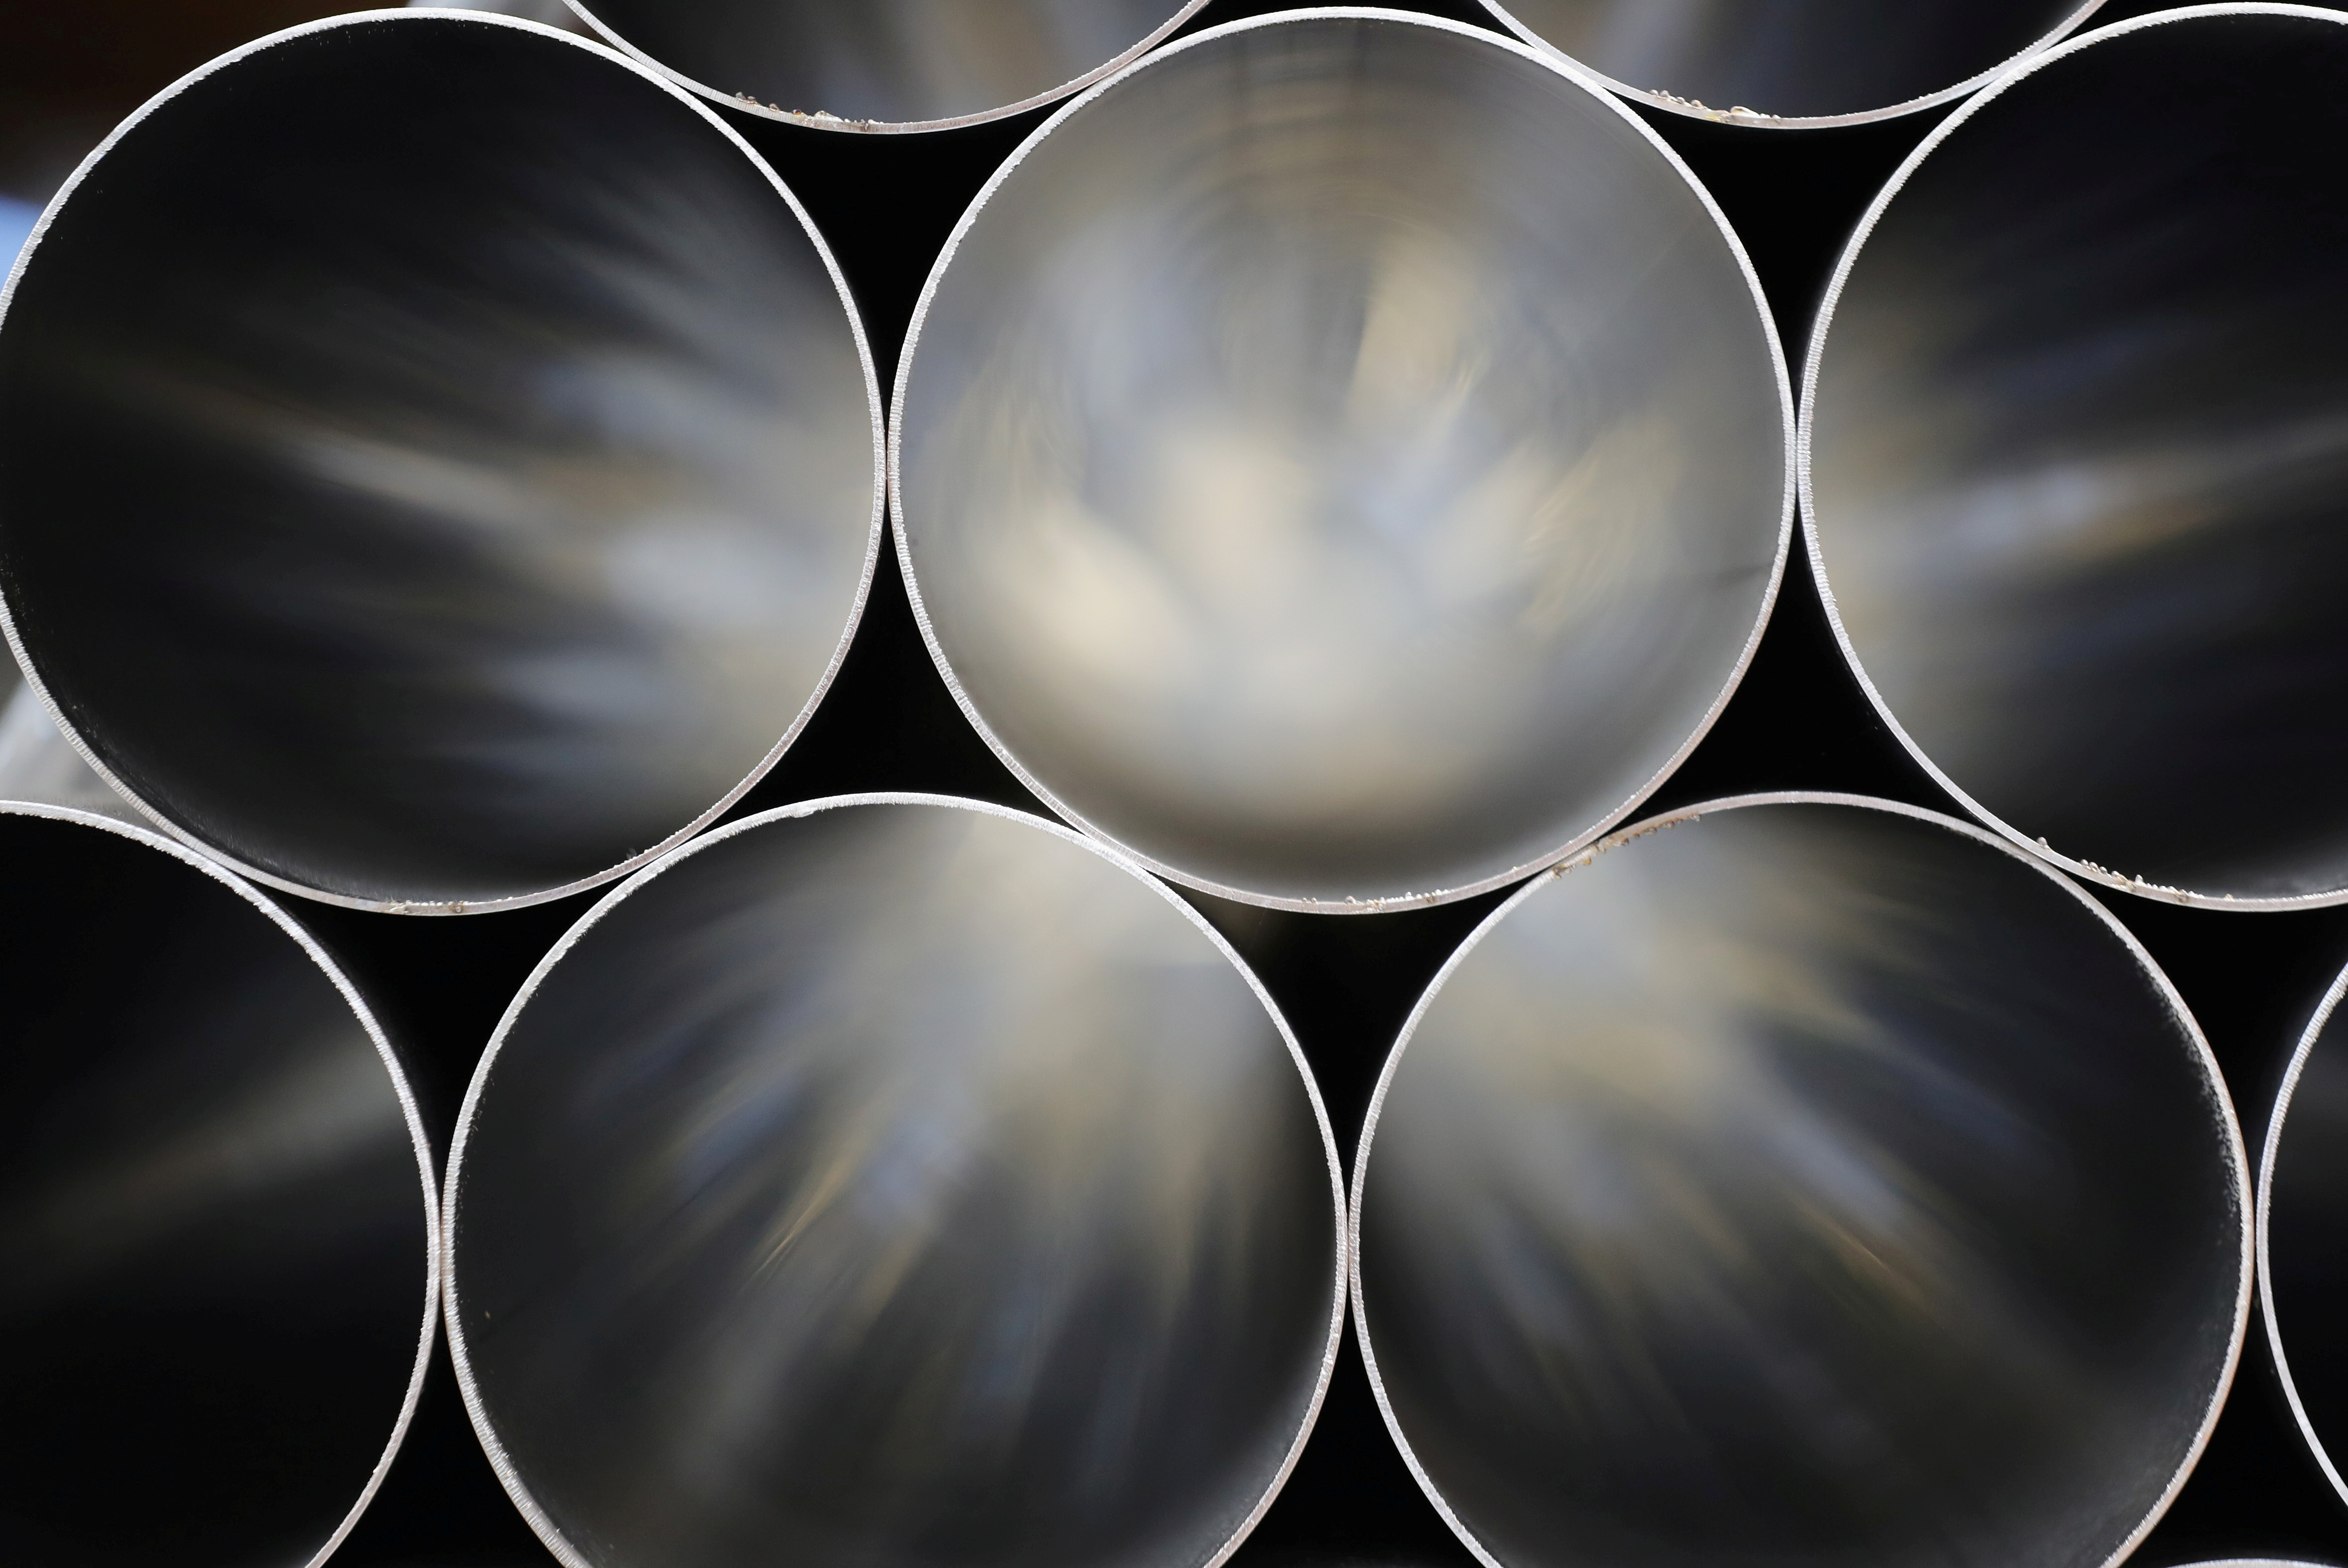 Stainless steel tubes are stored ready to be made into exhausts at the Eminox factory, during a post-Budget visit by Britain's Chancellor of the Exchequer Philip Hammond, in Gainsborough,